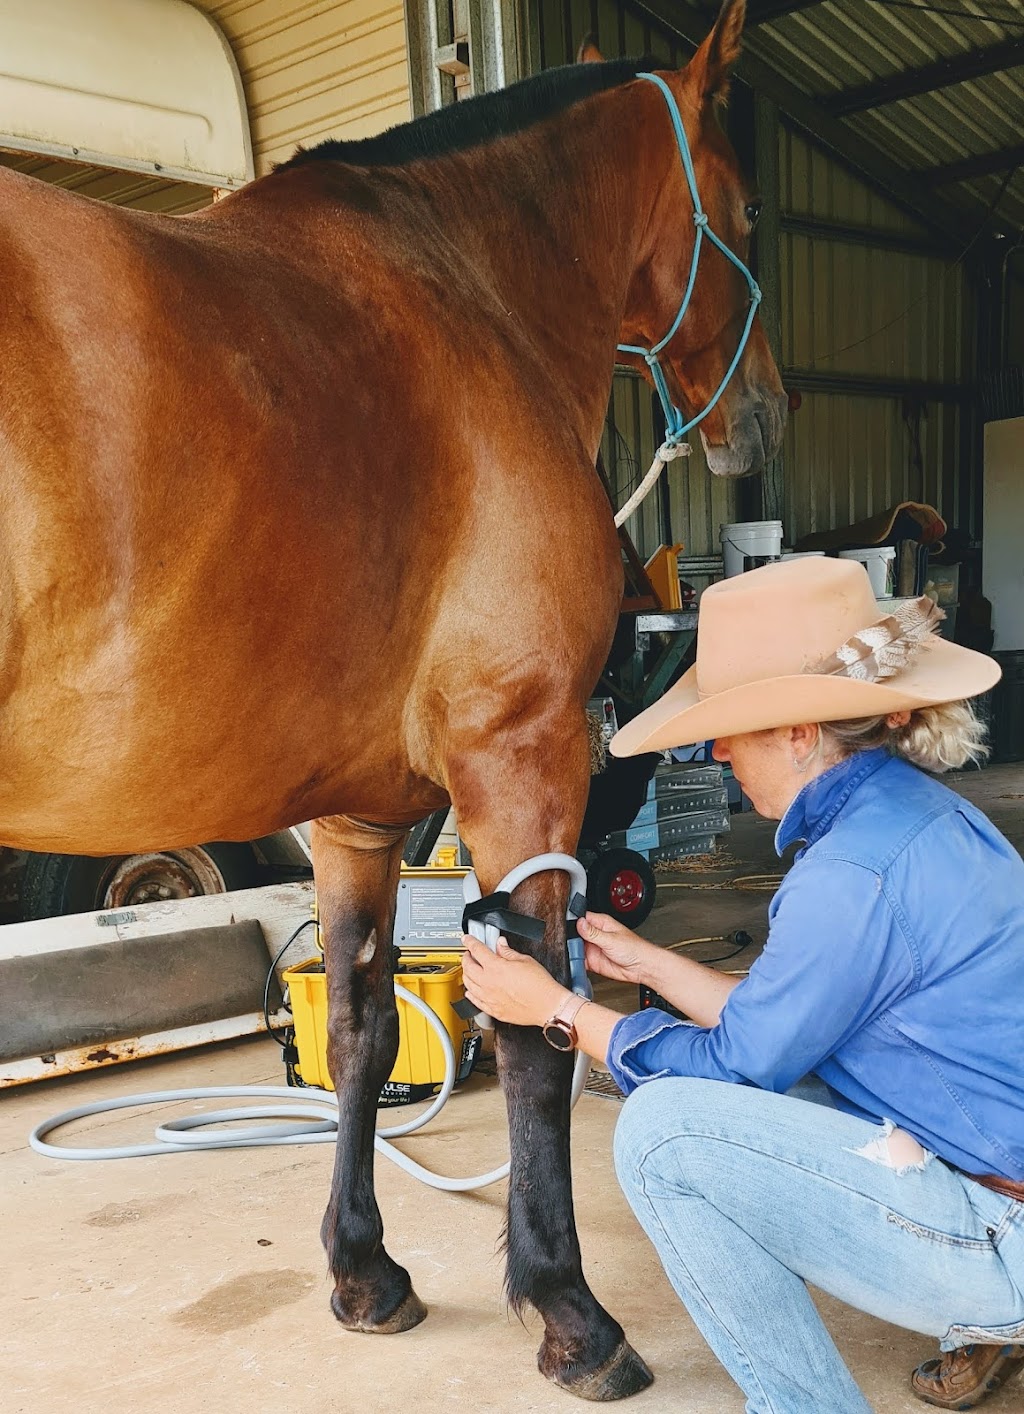 CAC Equine Therapy |  | 154 Walshs Rd, Nebo QLD 4742, Australia | 0447667066 OR +61 447 667 066